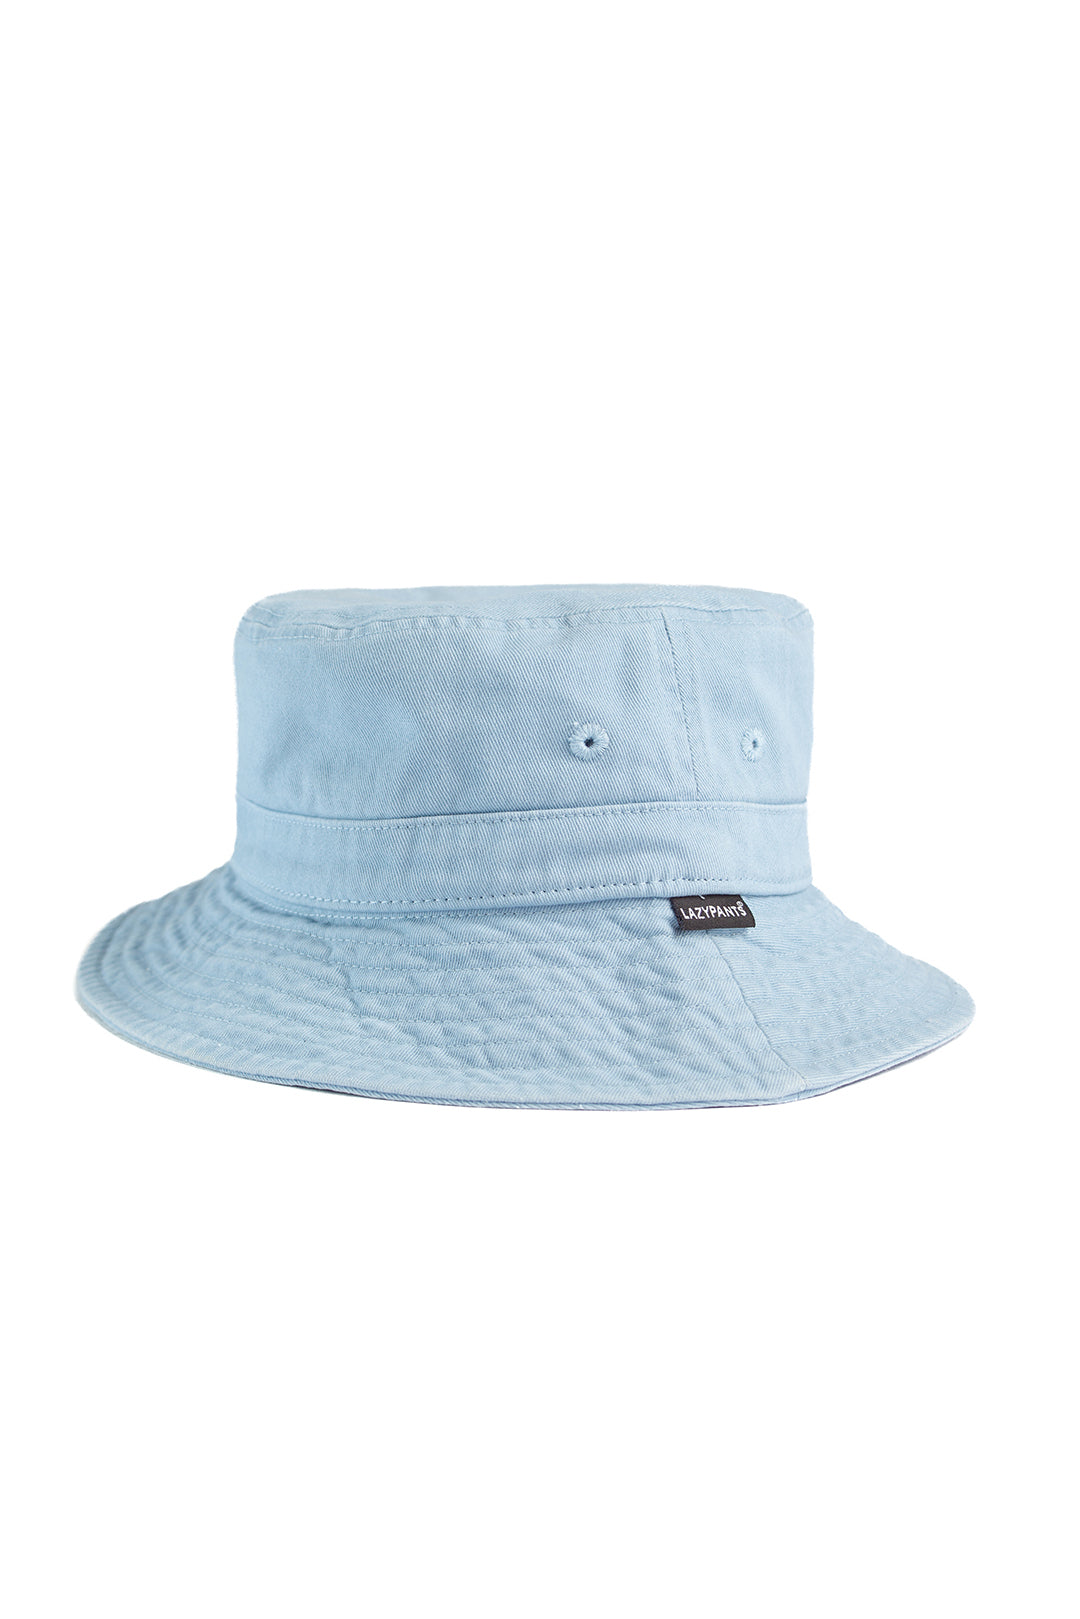 Washed cotton twill dad’s bucket hat in pastel blue